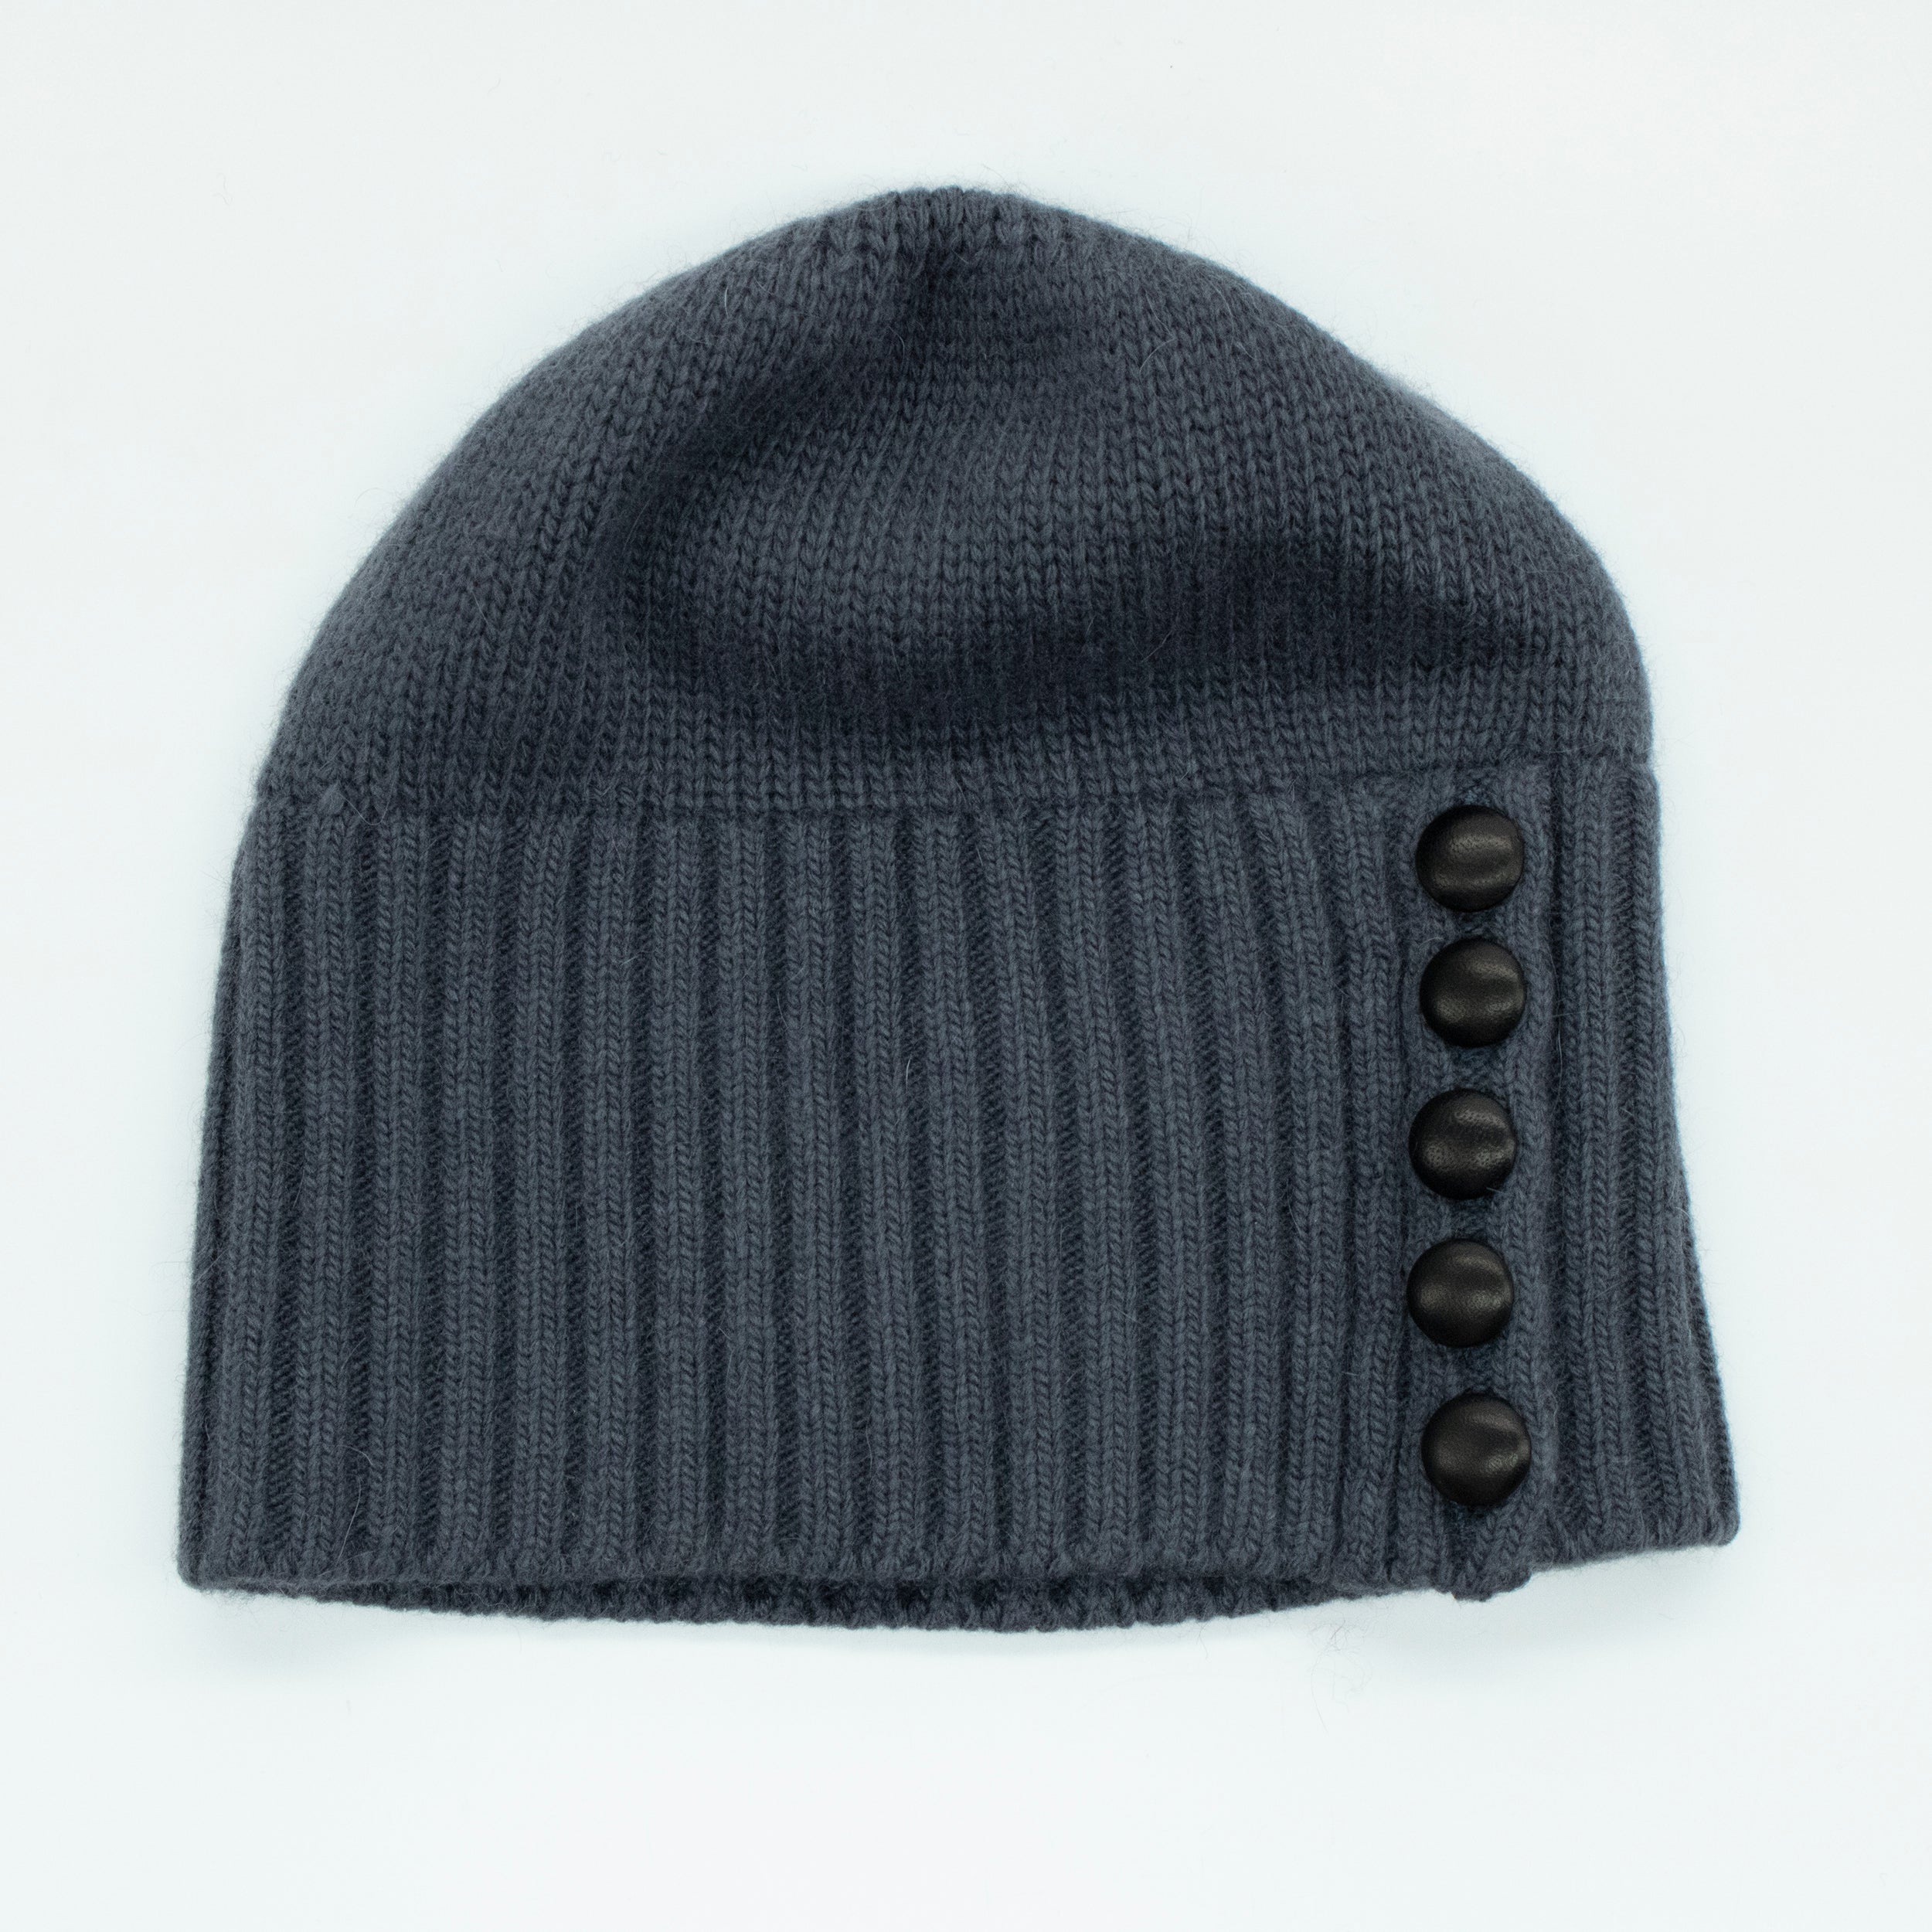 Portolano Beanie Hat With Leather Buttons In Gray